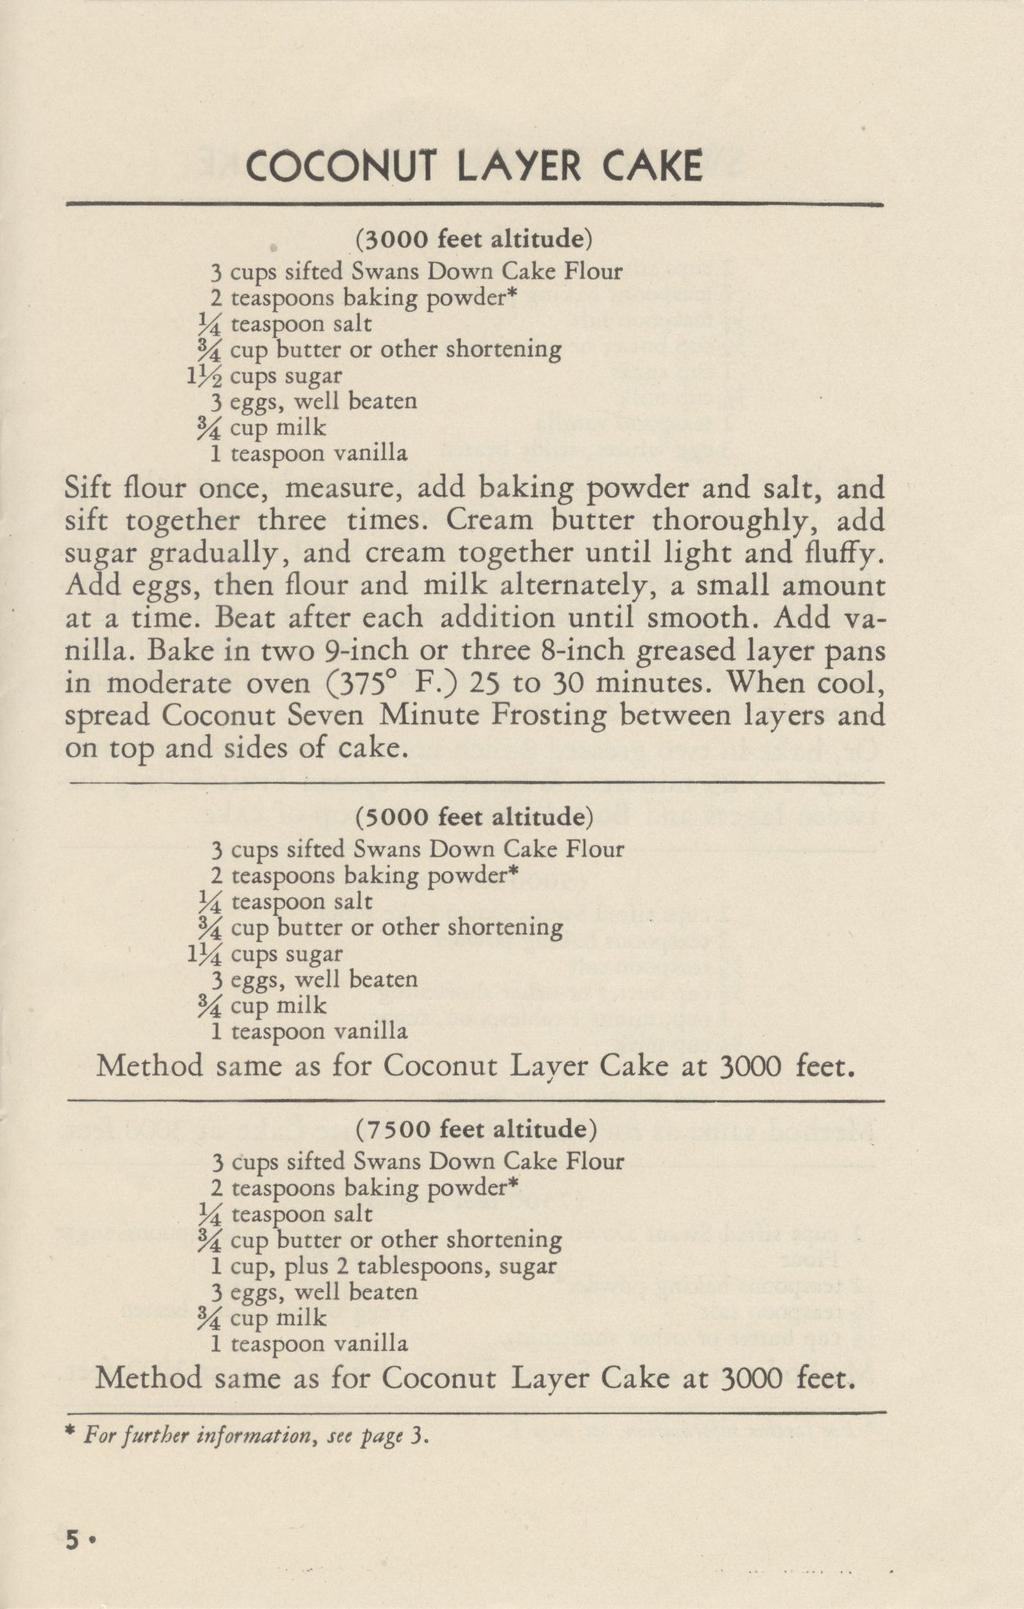 COCONUT LAYER CAKE (3000 feet altitude) 3 cups sifted Swans Down Cake Flour 2 teaspoons baking powder* 54 cup butter or other shortening 134 cups sugar 3 eggs, well beaten cup milk Sift flour once,